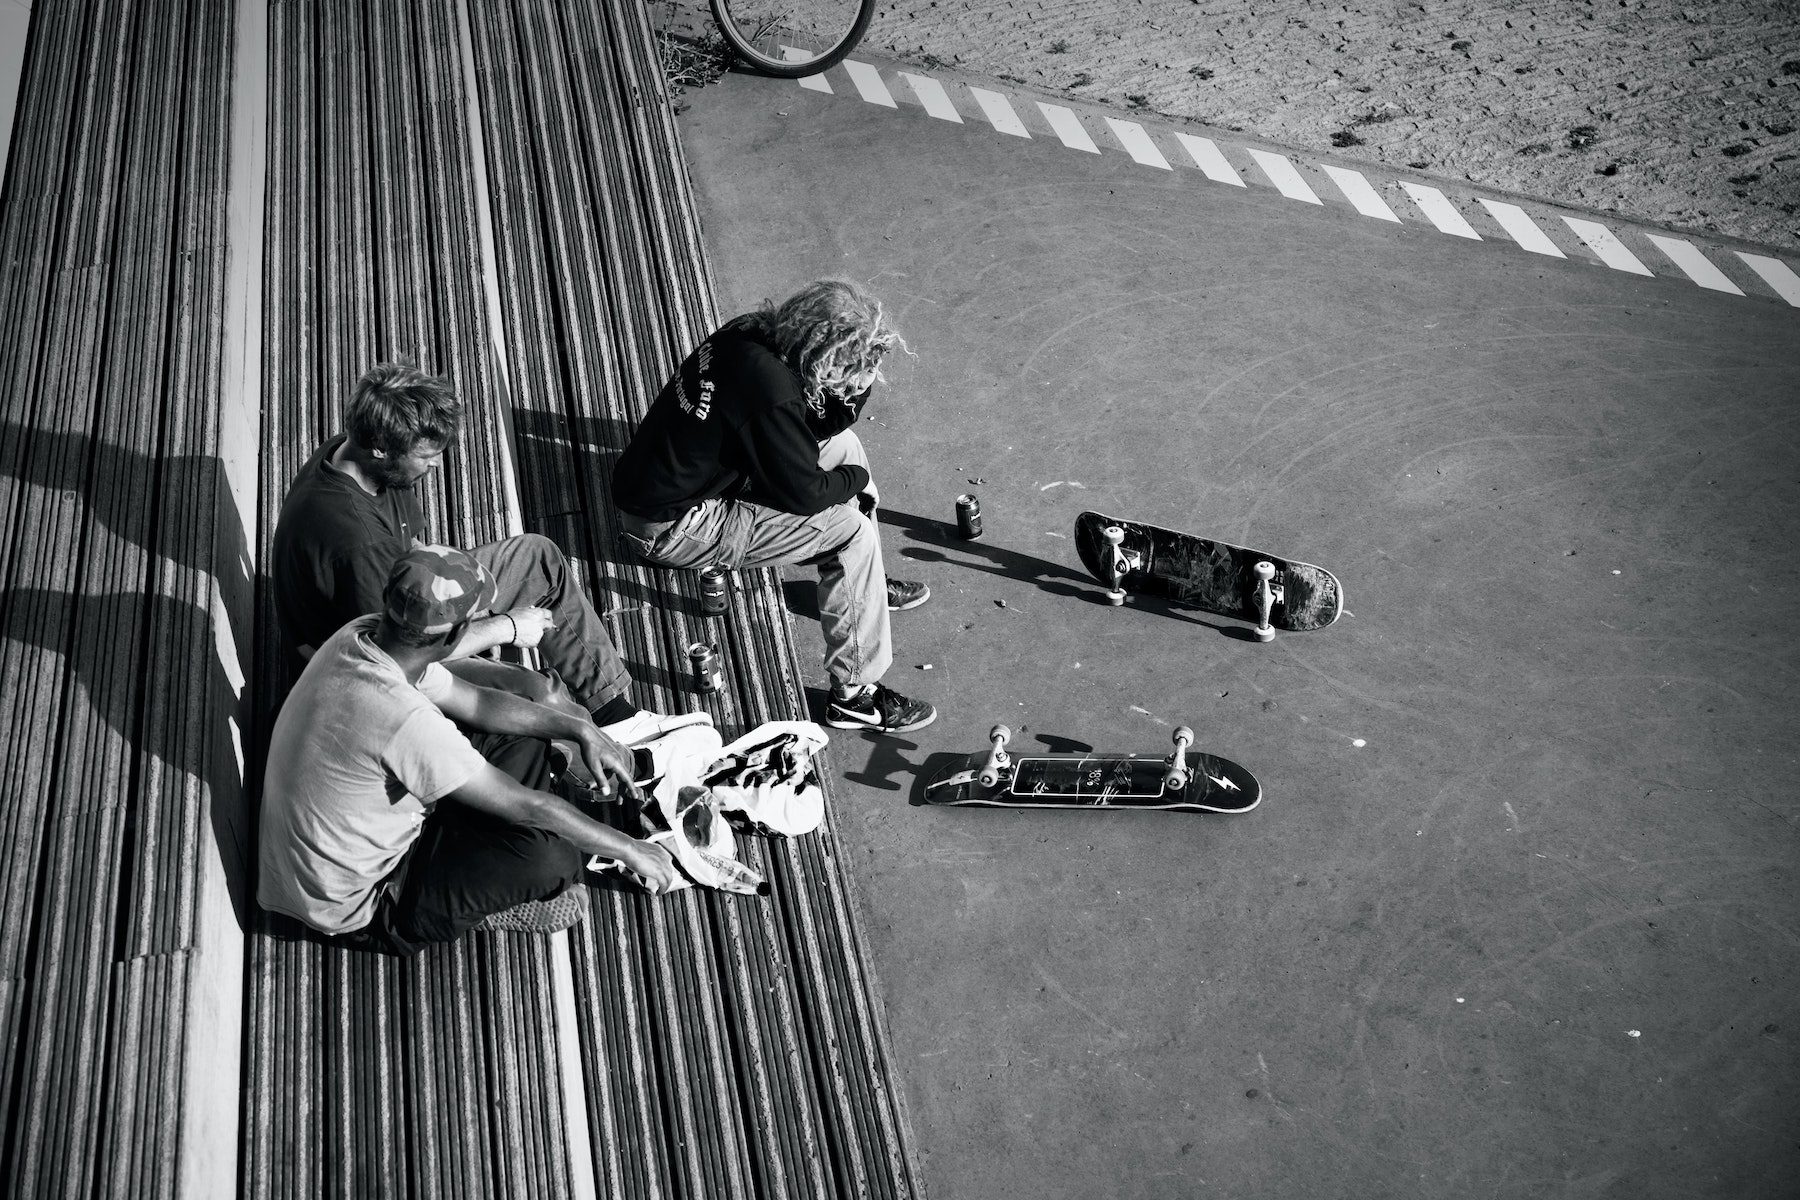 A trio of skateboarders taking a break and sipping on soda as they sit upon large steps